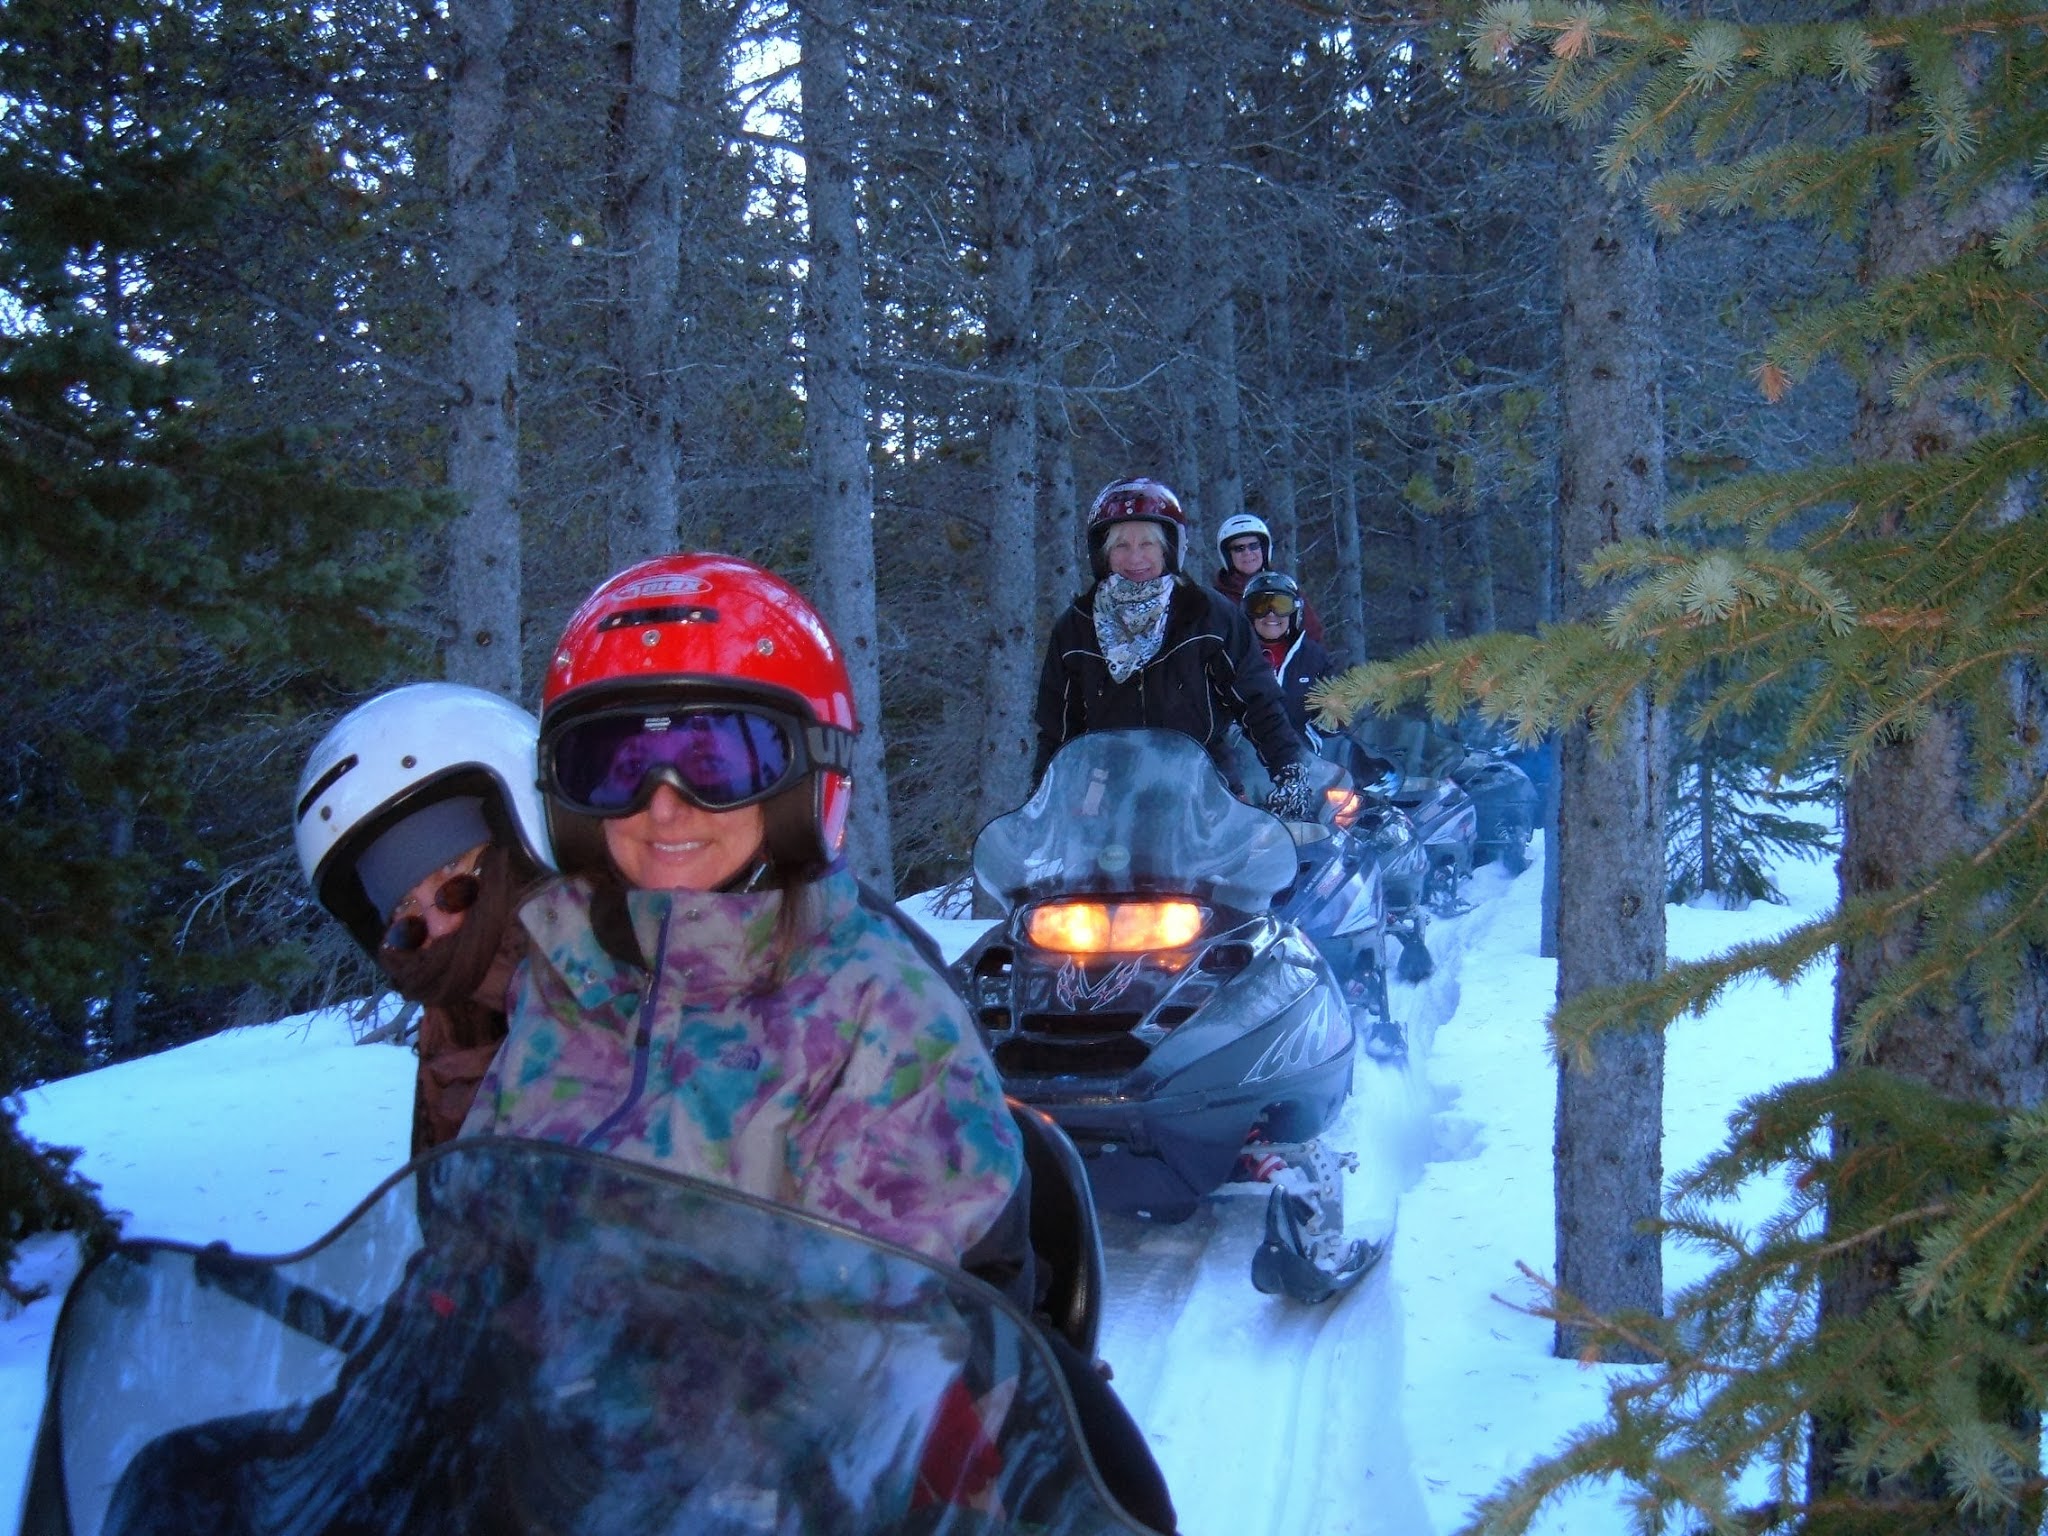 Snowmobile tour in the forest with 5 people.